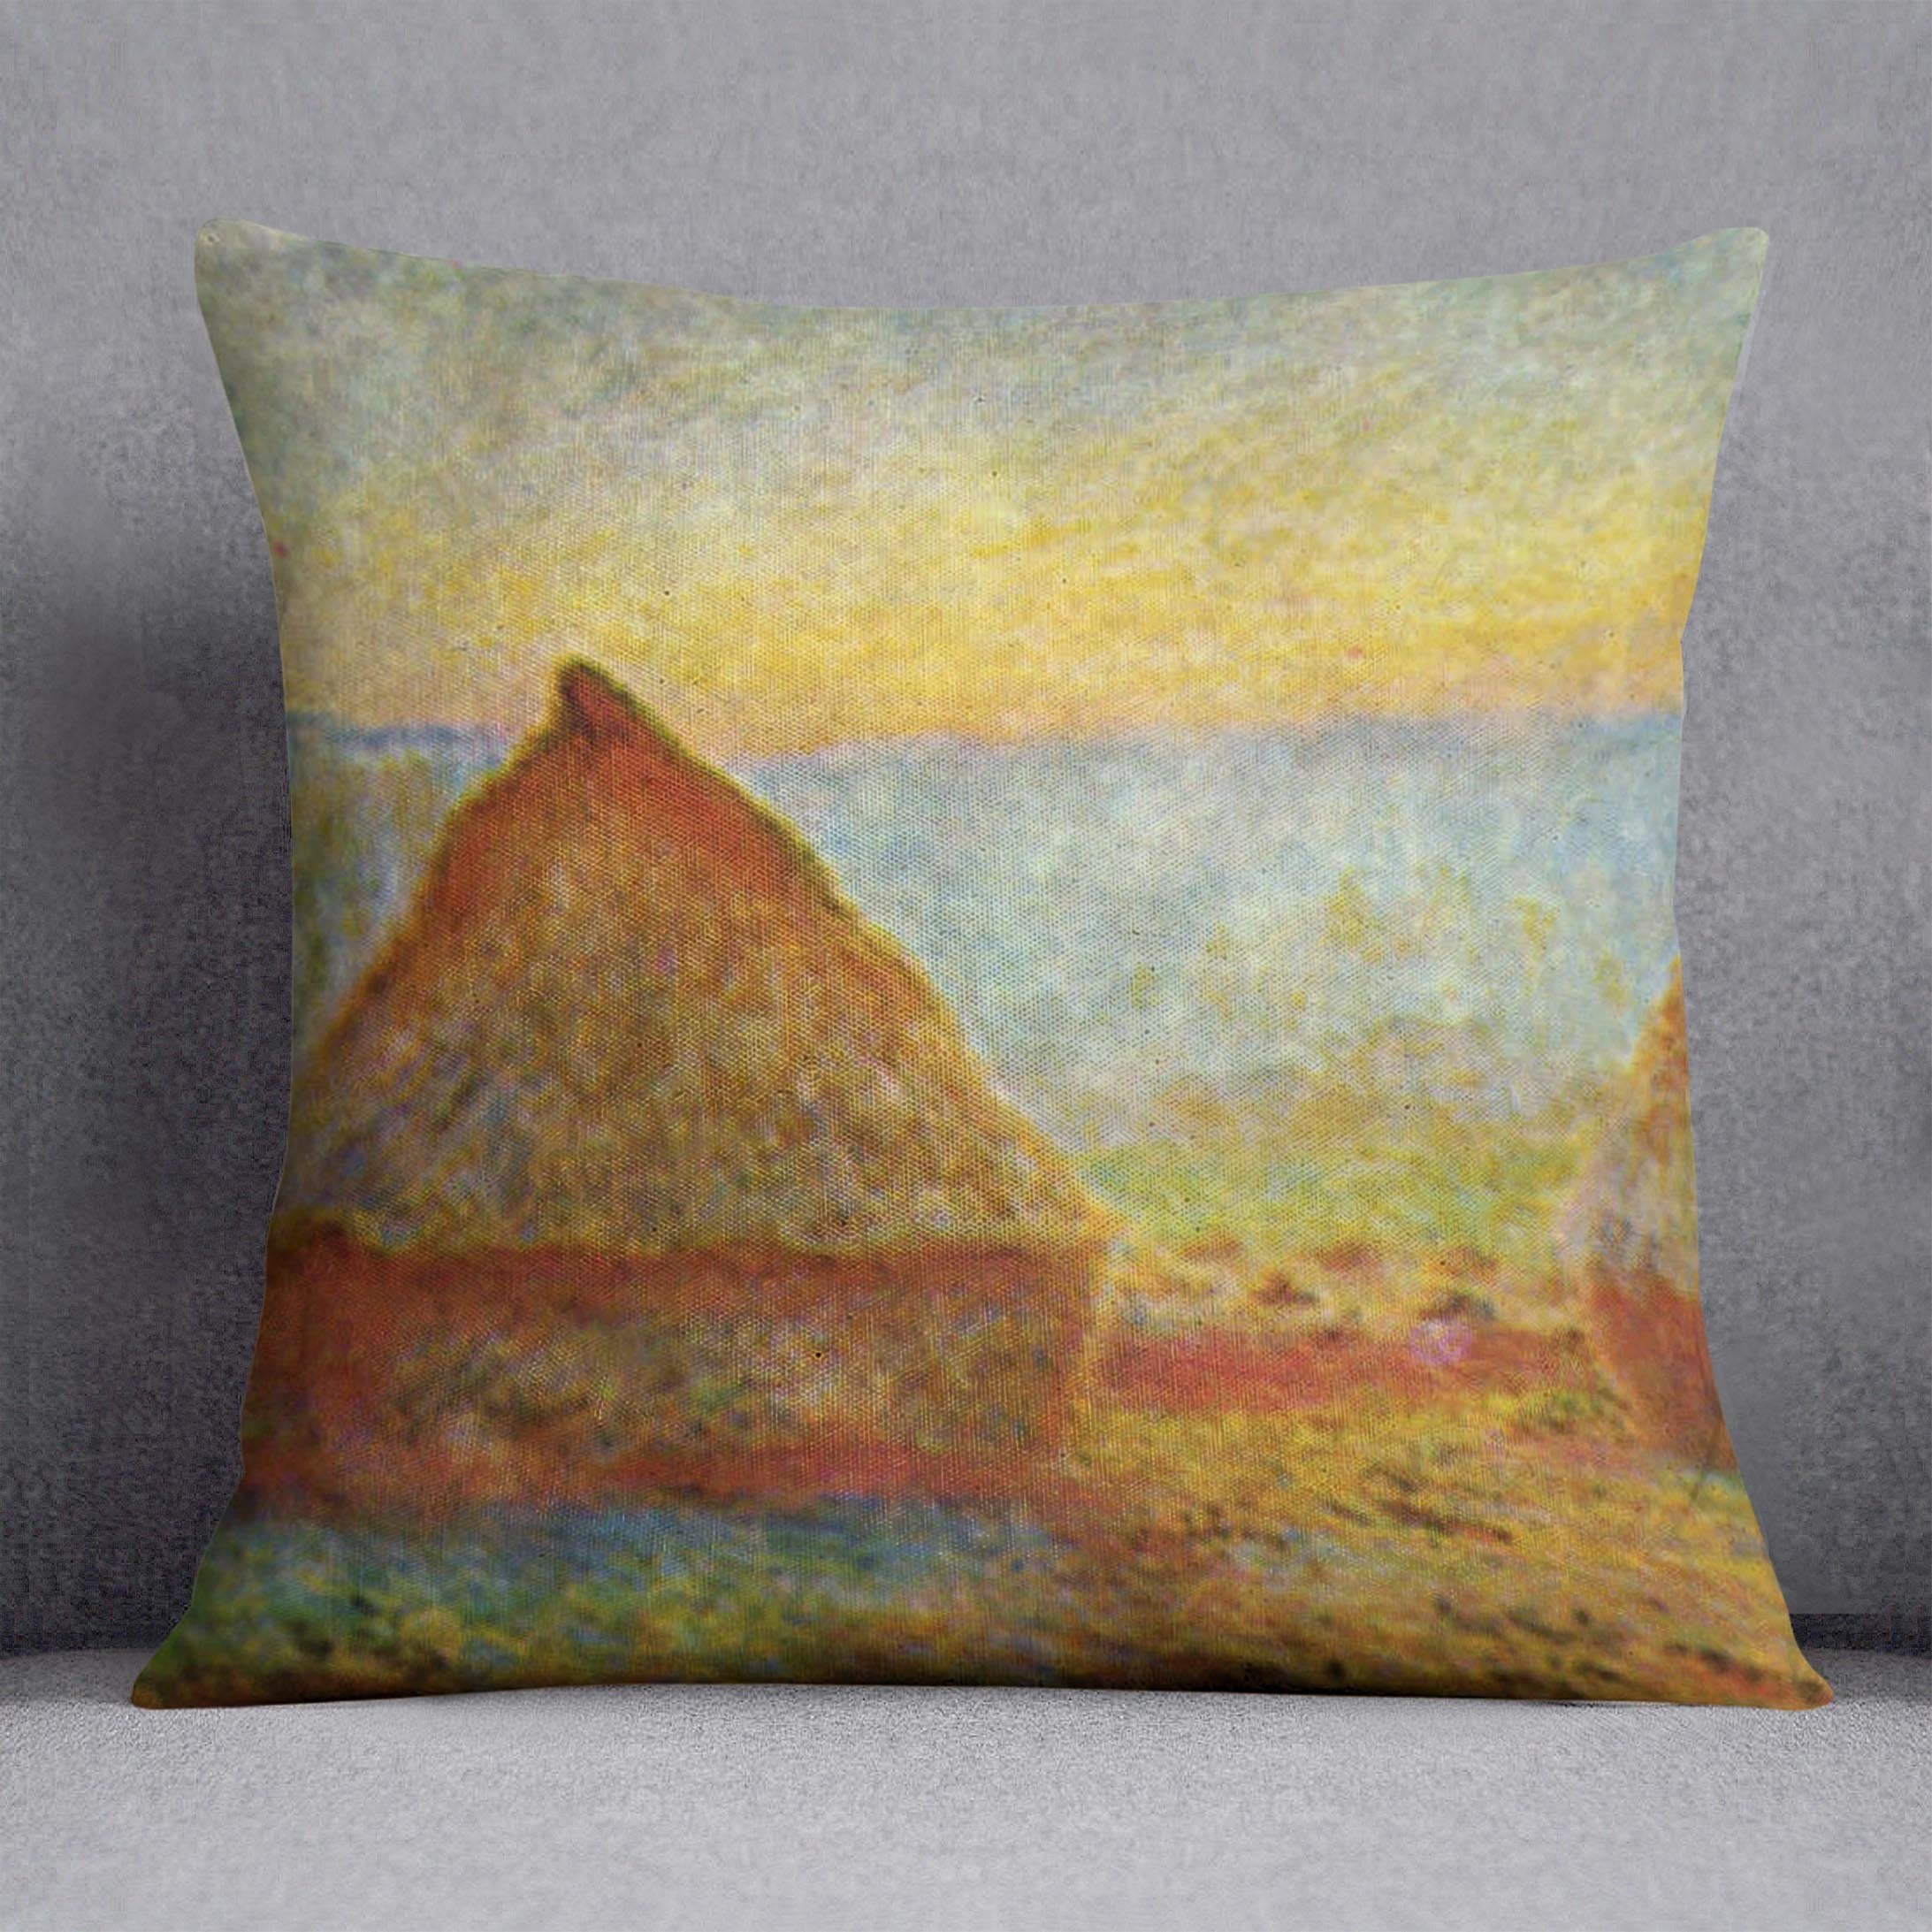 Haystack 1 by Monet Throw Pillow